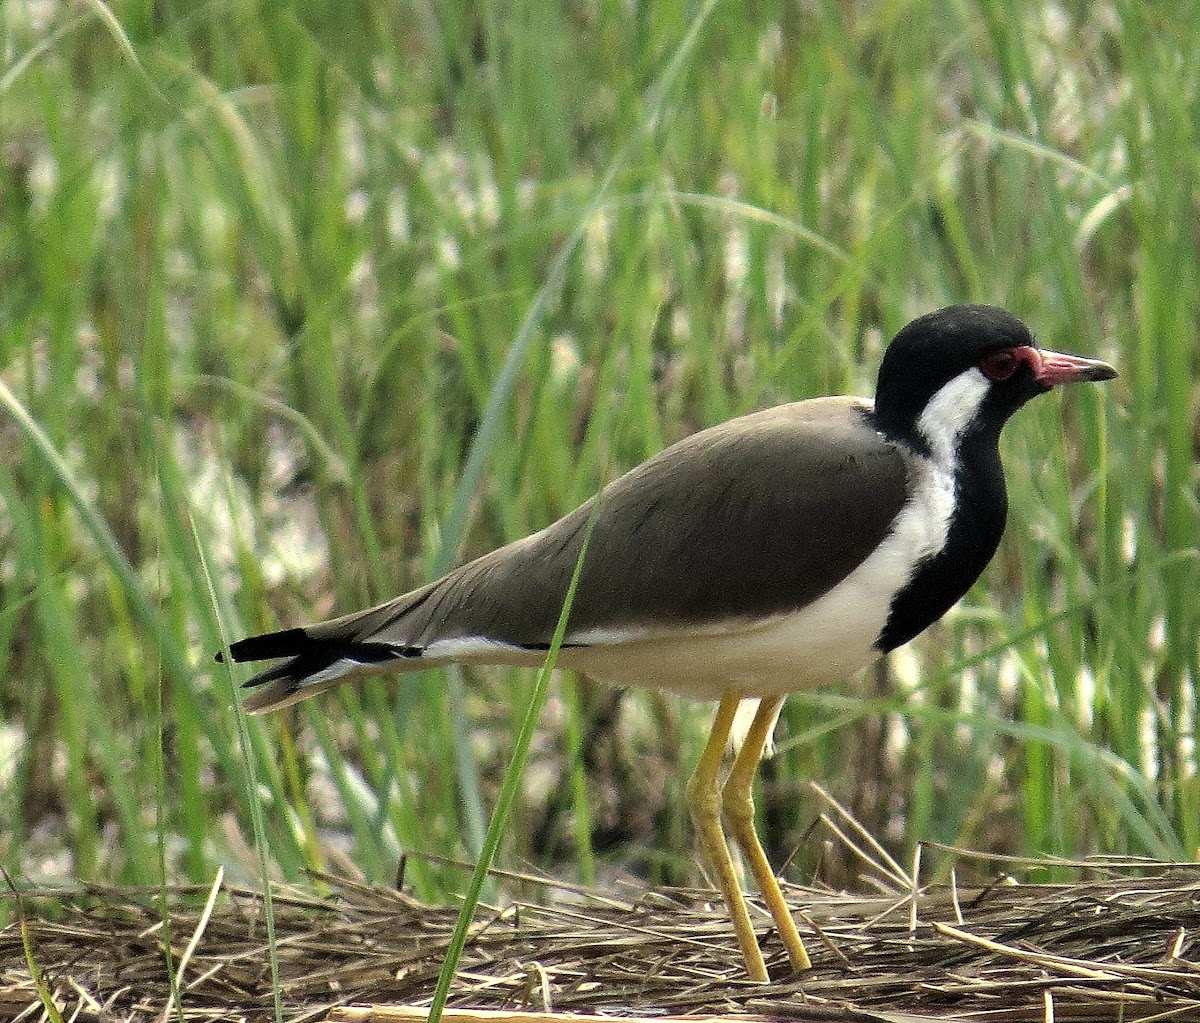 Red Wattled Lapwing